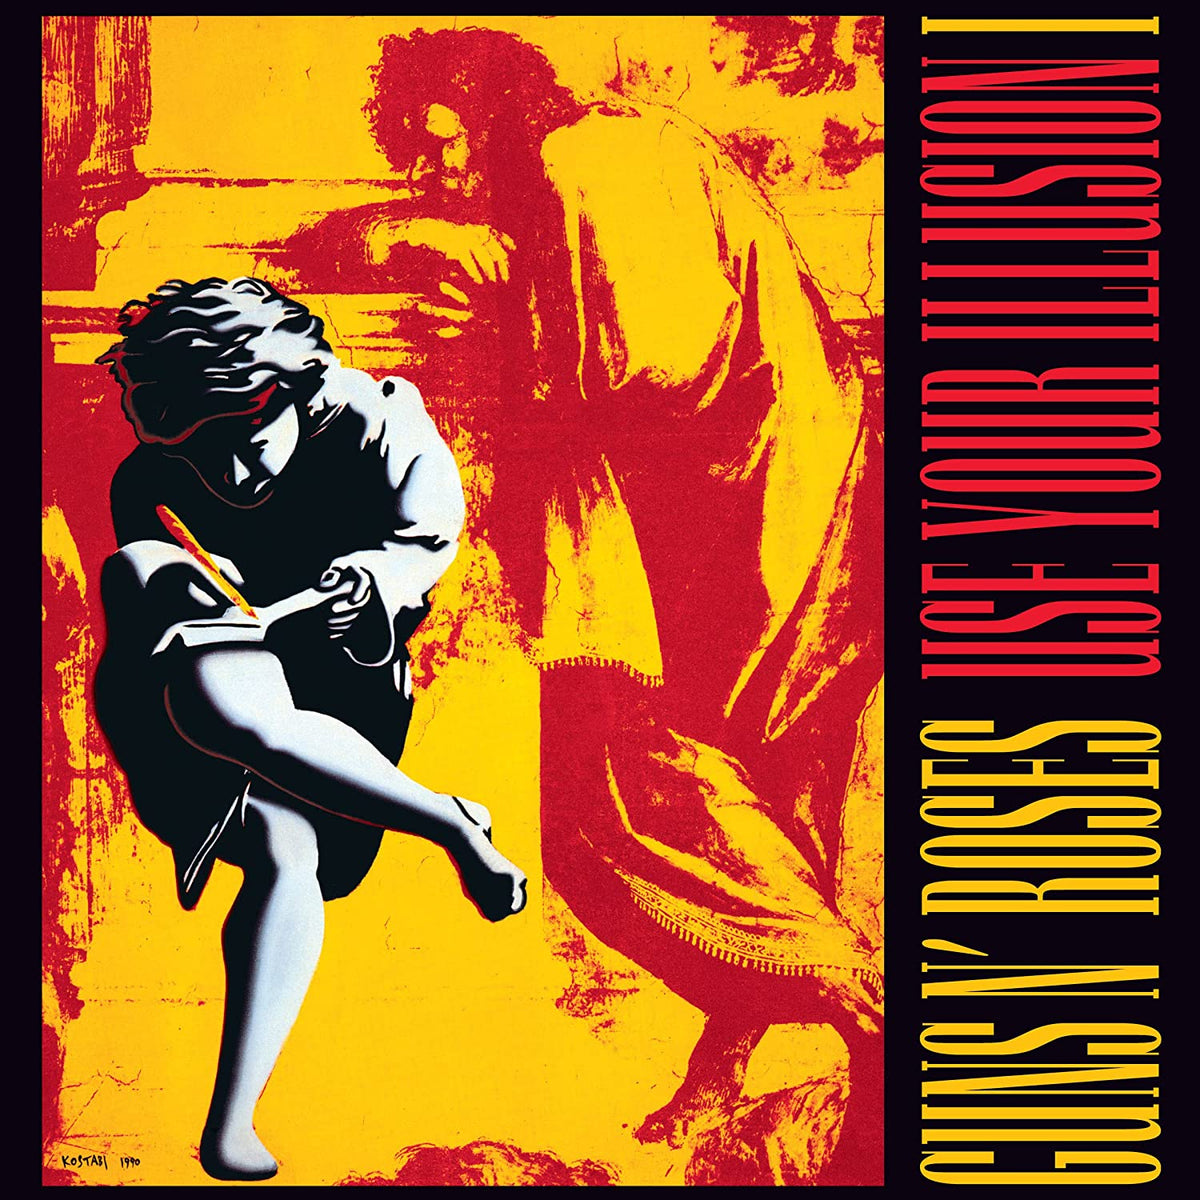 Guns N' Roses - Use Your Illusion I (Deluxe Edition) (CD)